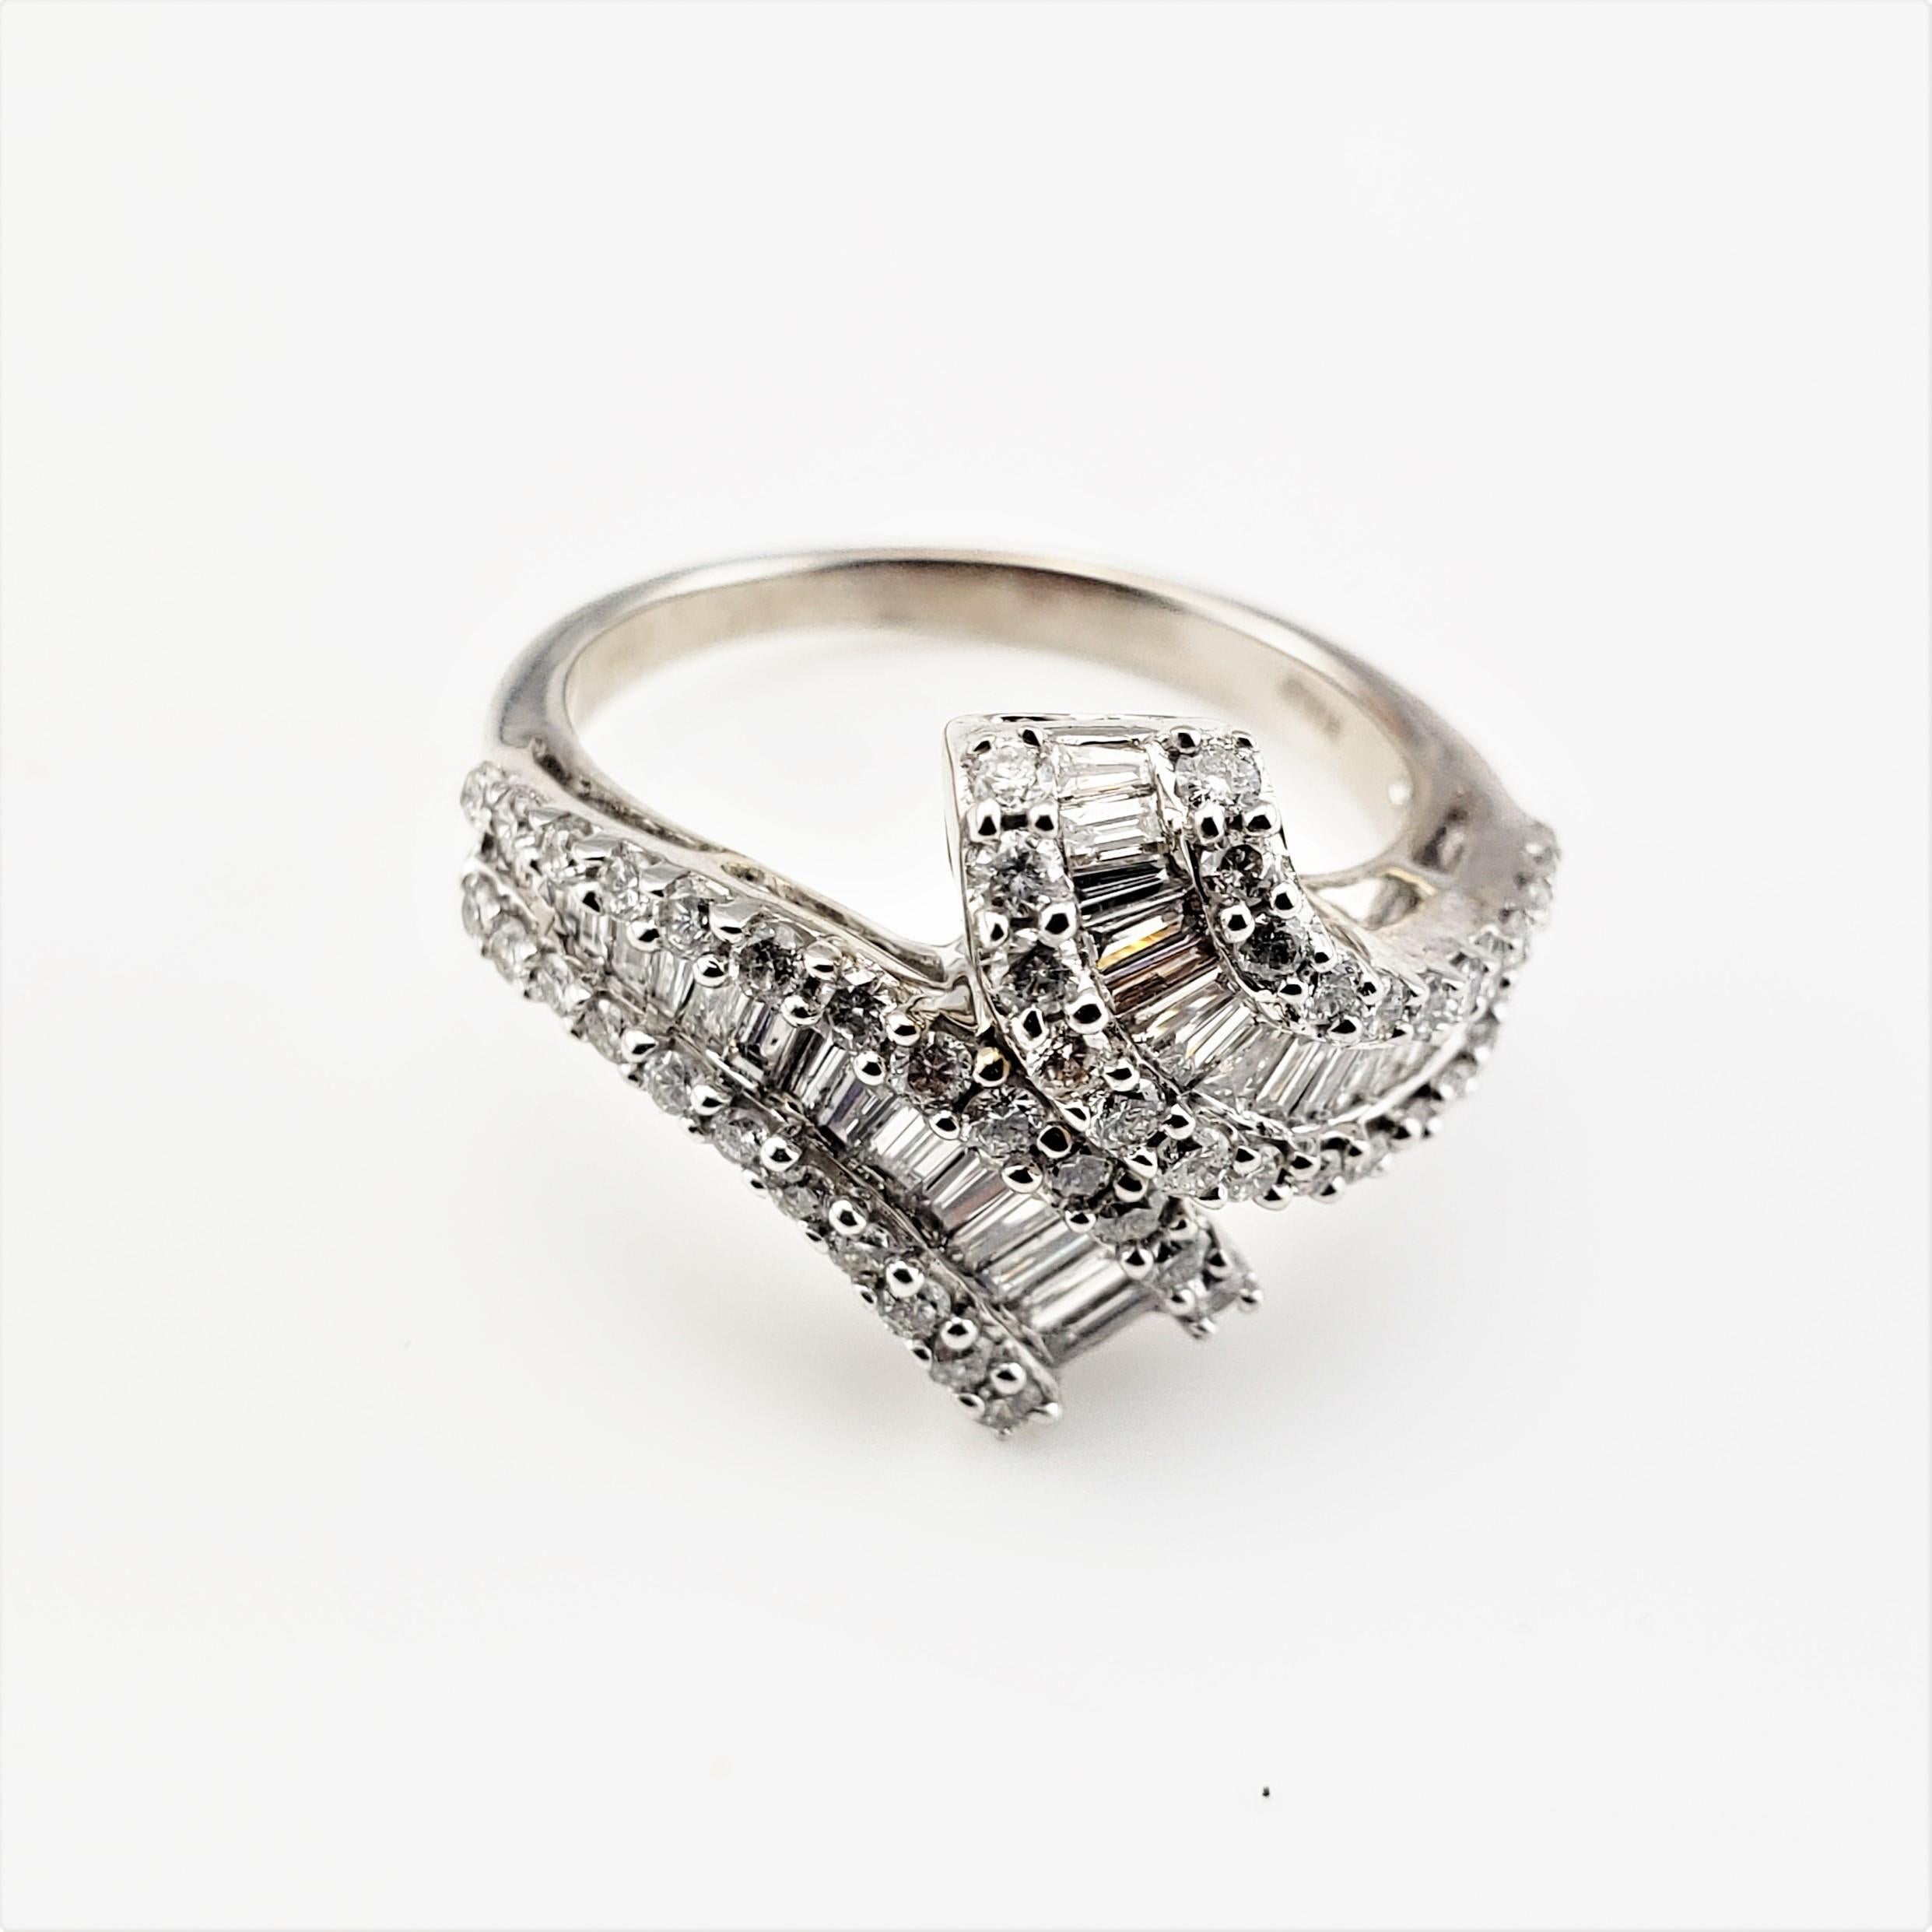 14 Karat White Gold and Diamond Ring Size 6.75 GAI Certified-

This sparkling ring features five round brilliant cut diamonds and 37 baguette diamonds set in classic 14K white gold.  Width:  15 mm.
Shank:  2 mm.

Total diamond weight:  1.25